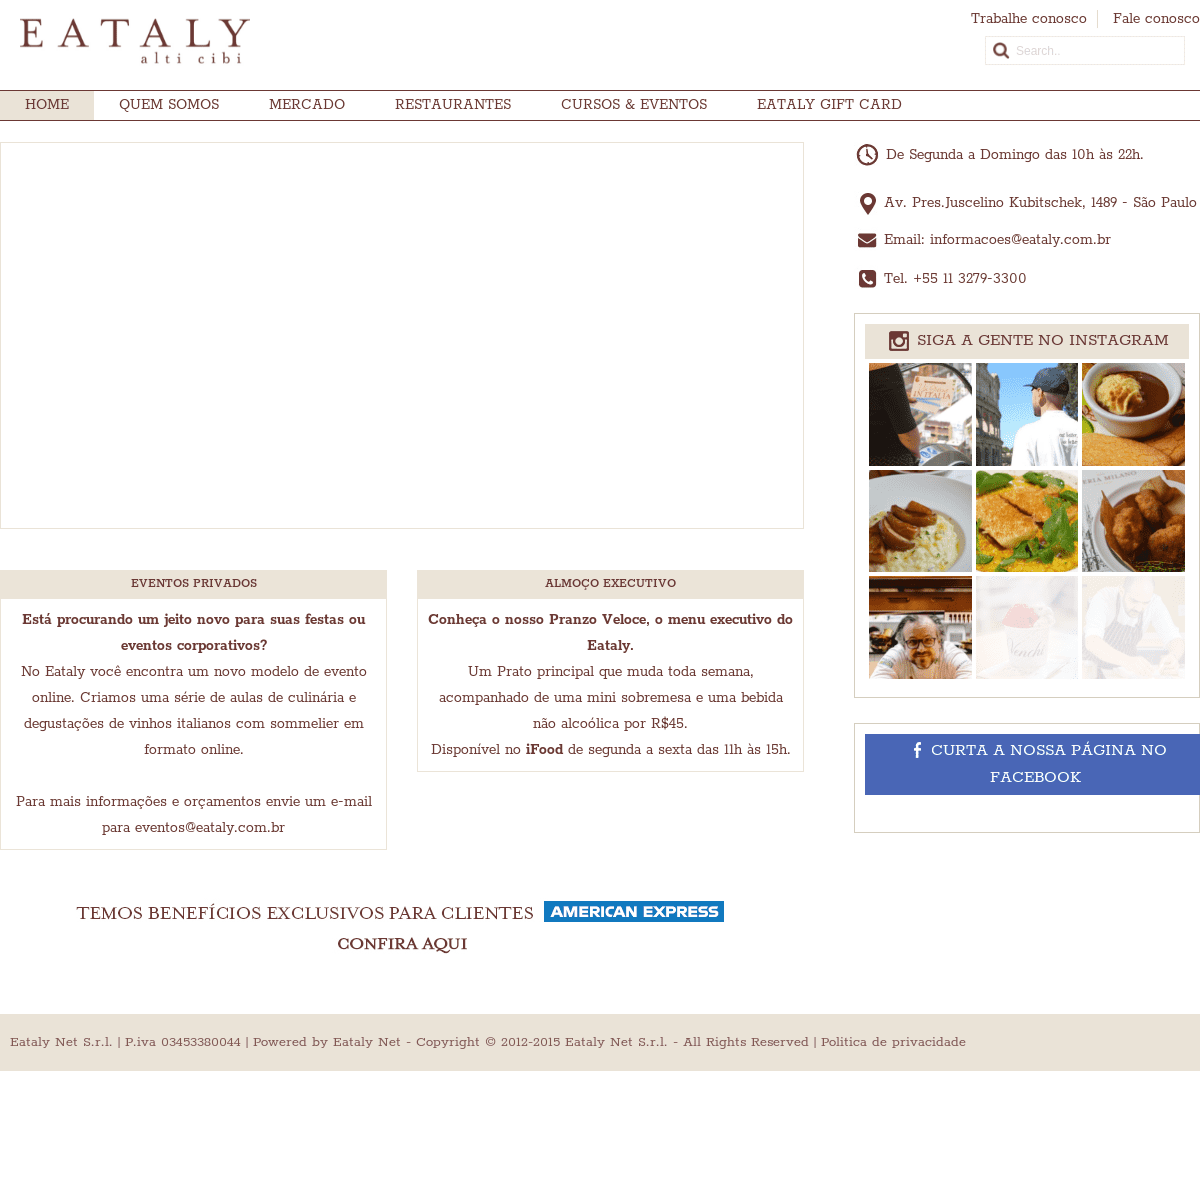 A complete backup of https://eataly.com.br